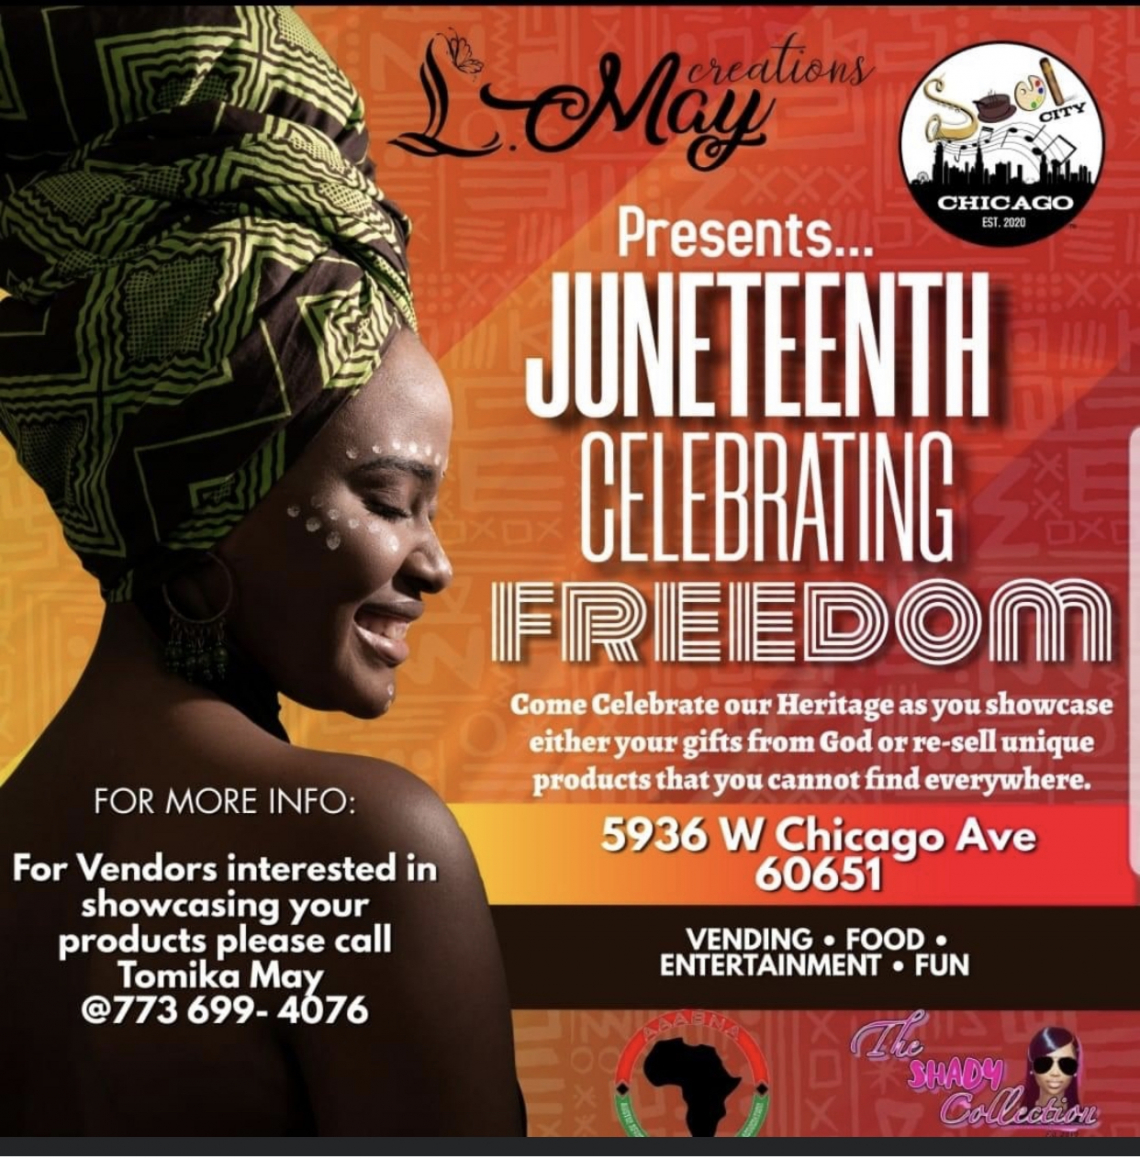 Juneteenth Free Food, Fun Vending Opportunities, Music and Entertainment  